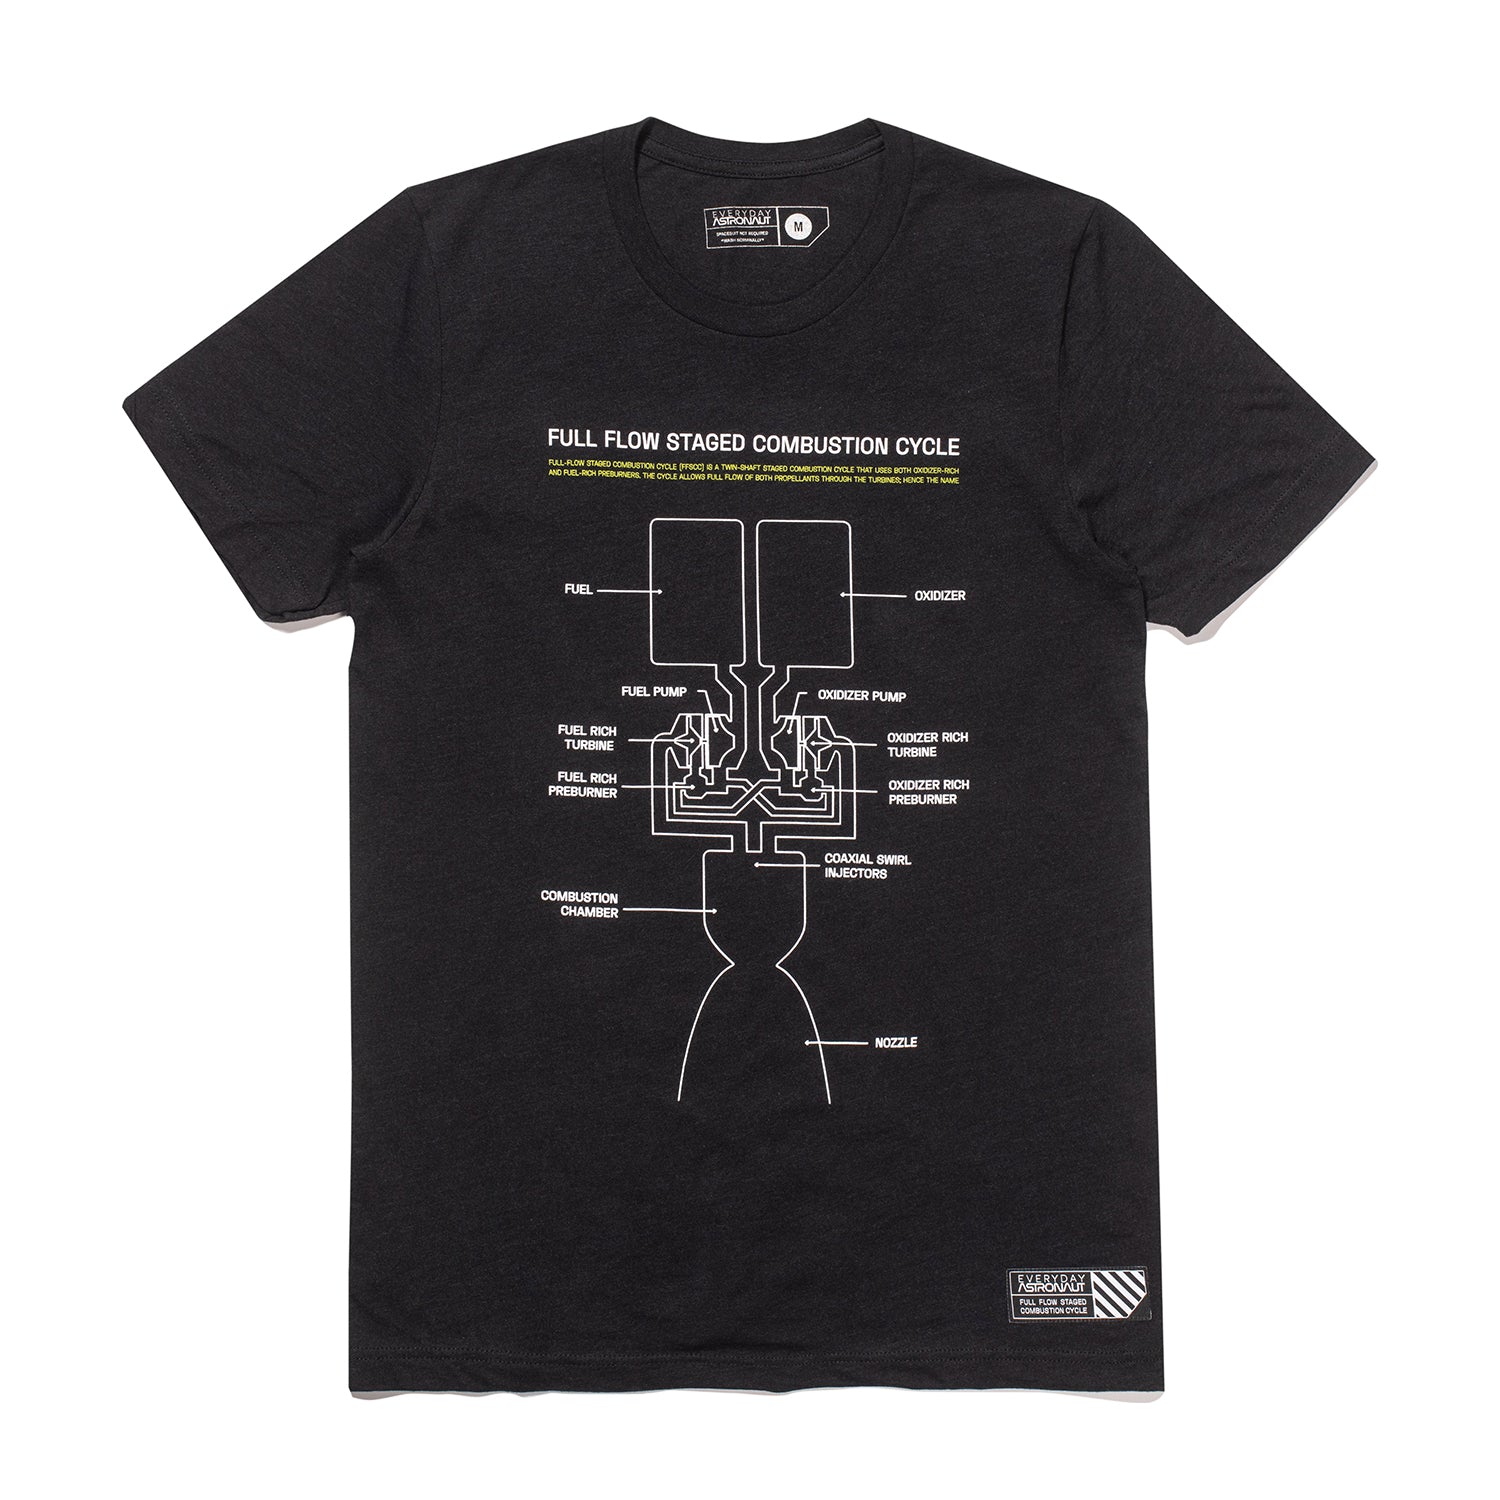 Full Flow Staged Combustion Cycle Tee – everydayastronaut